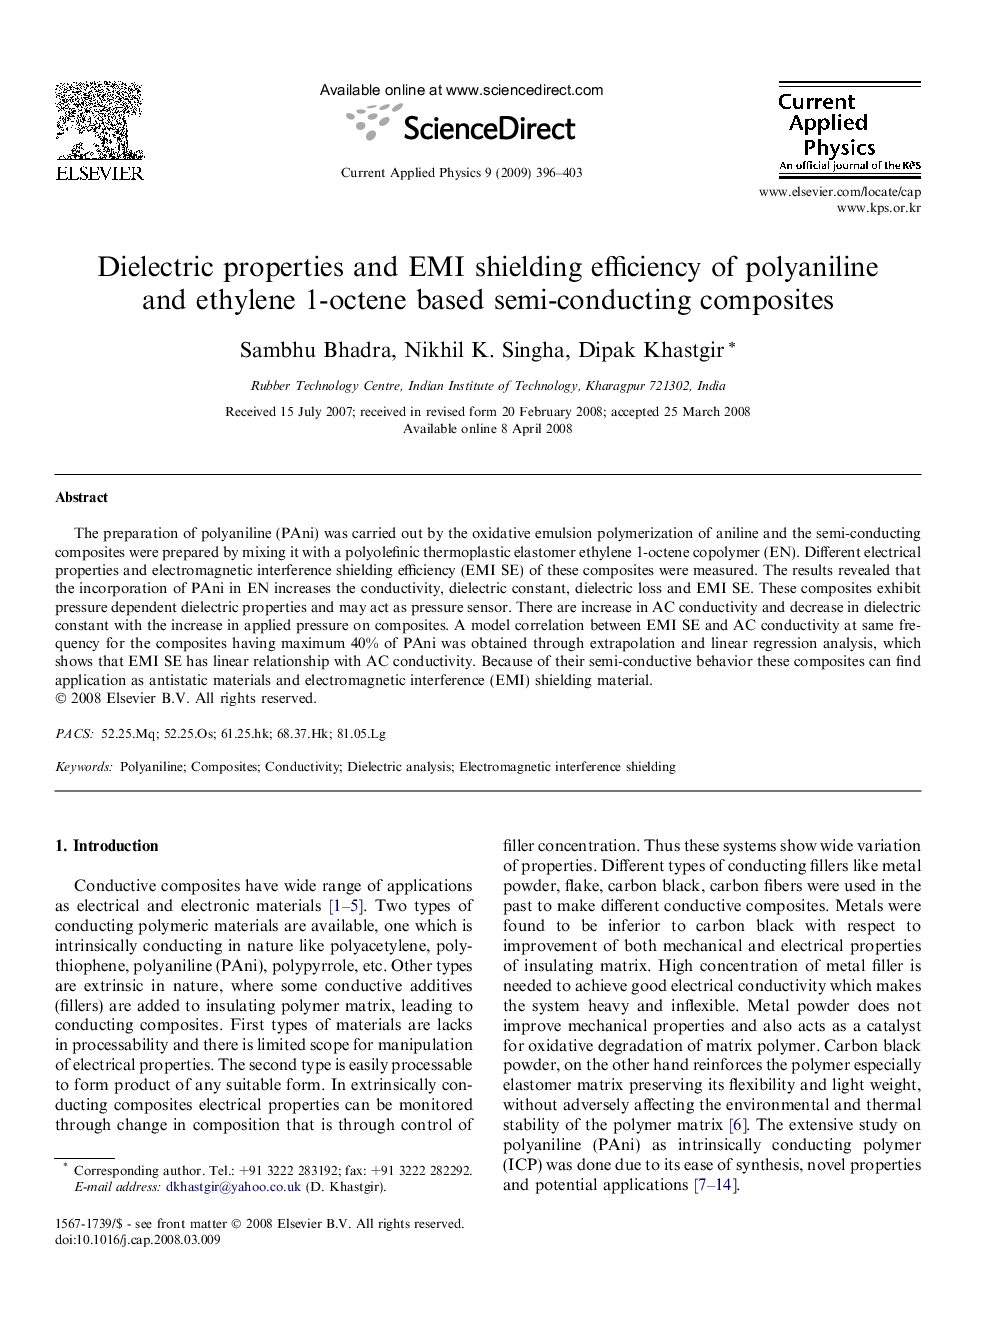 Dielectric properties and EMI shielding efficiency of polyaniline and ethylene 1-octene based semi-conducting composites